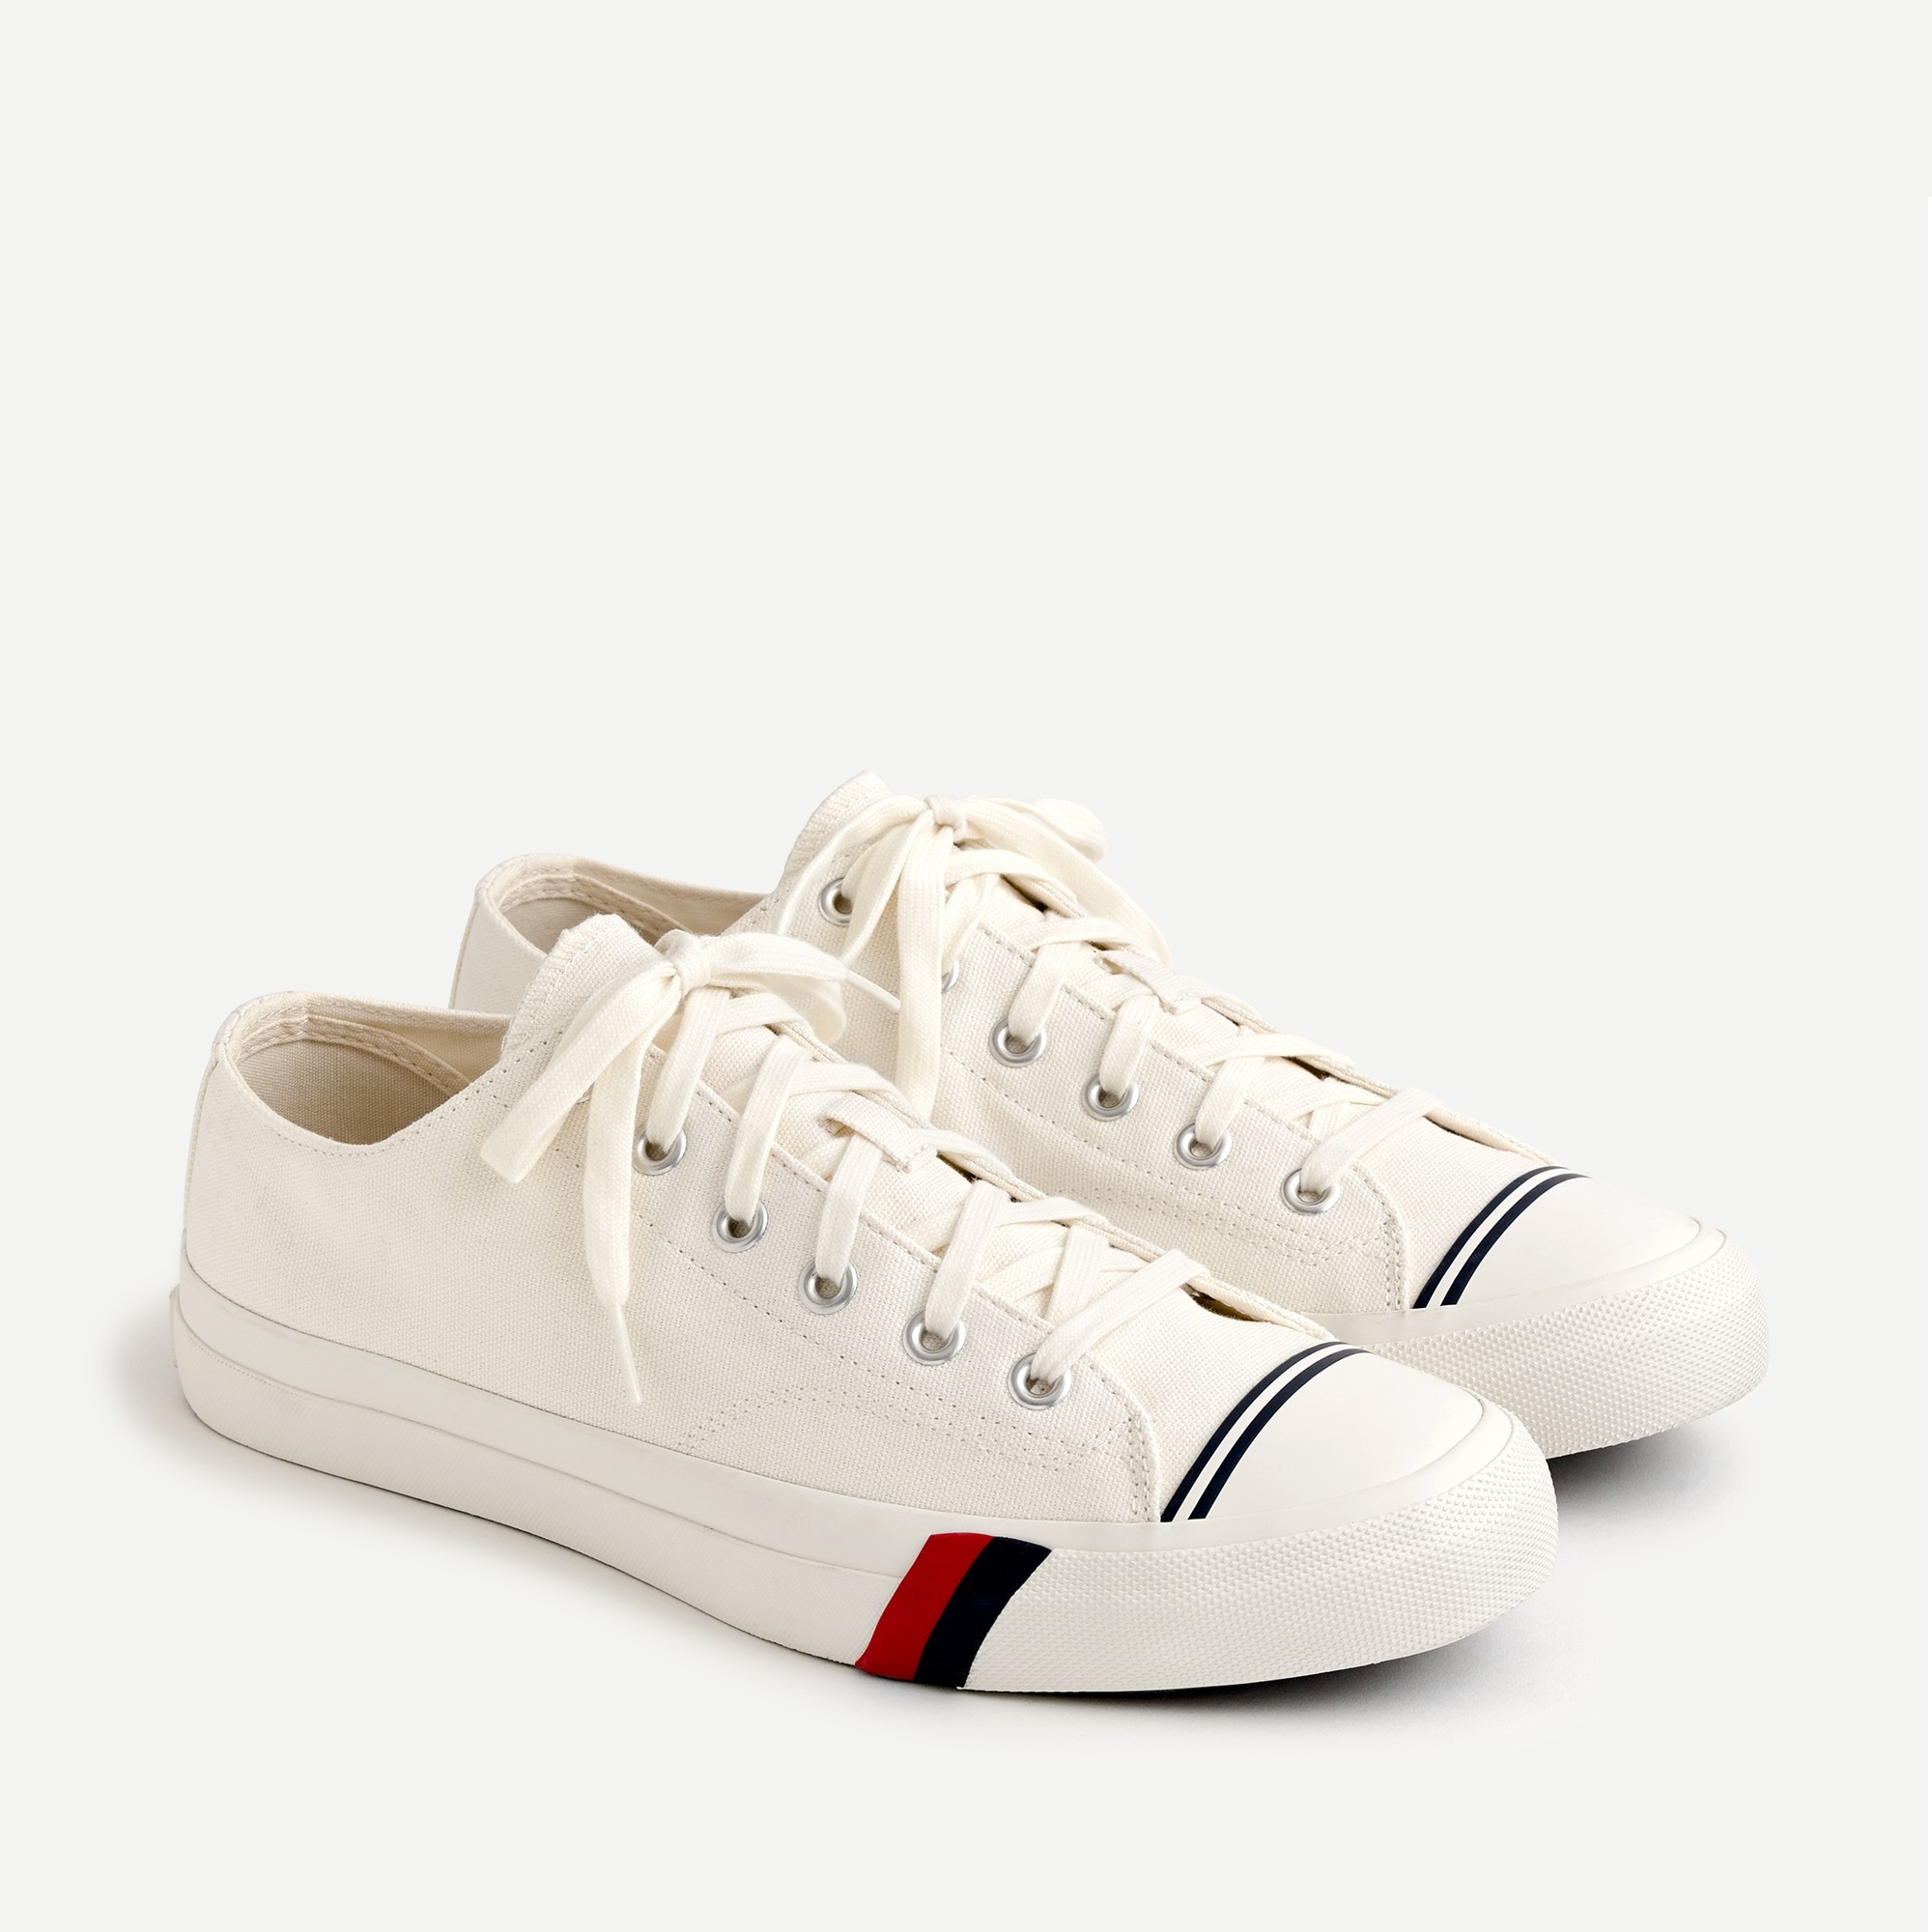 keds white canvas sneakers